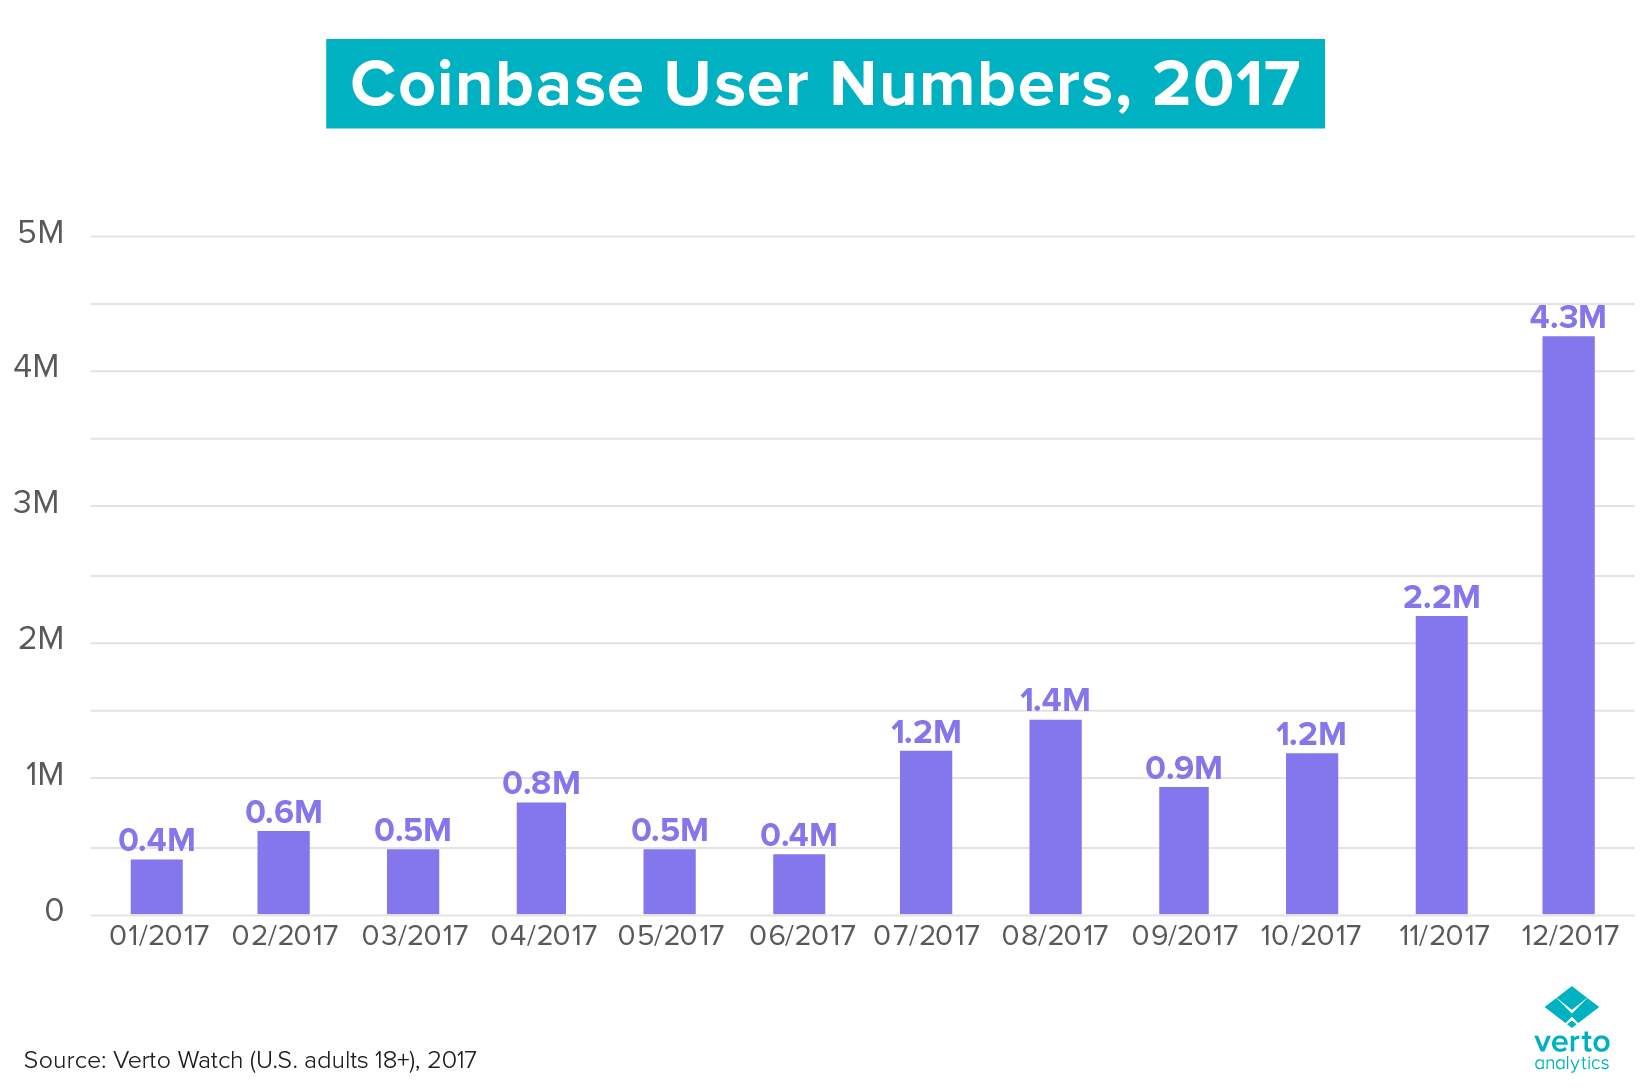 Coinbase User Numbers - 2017